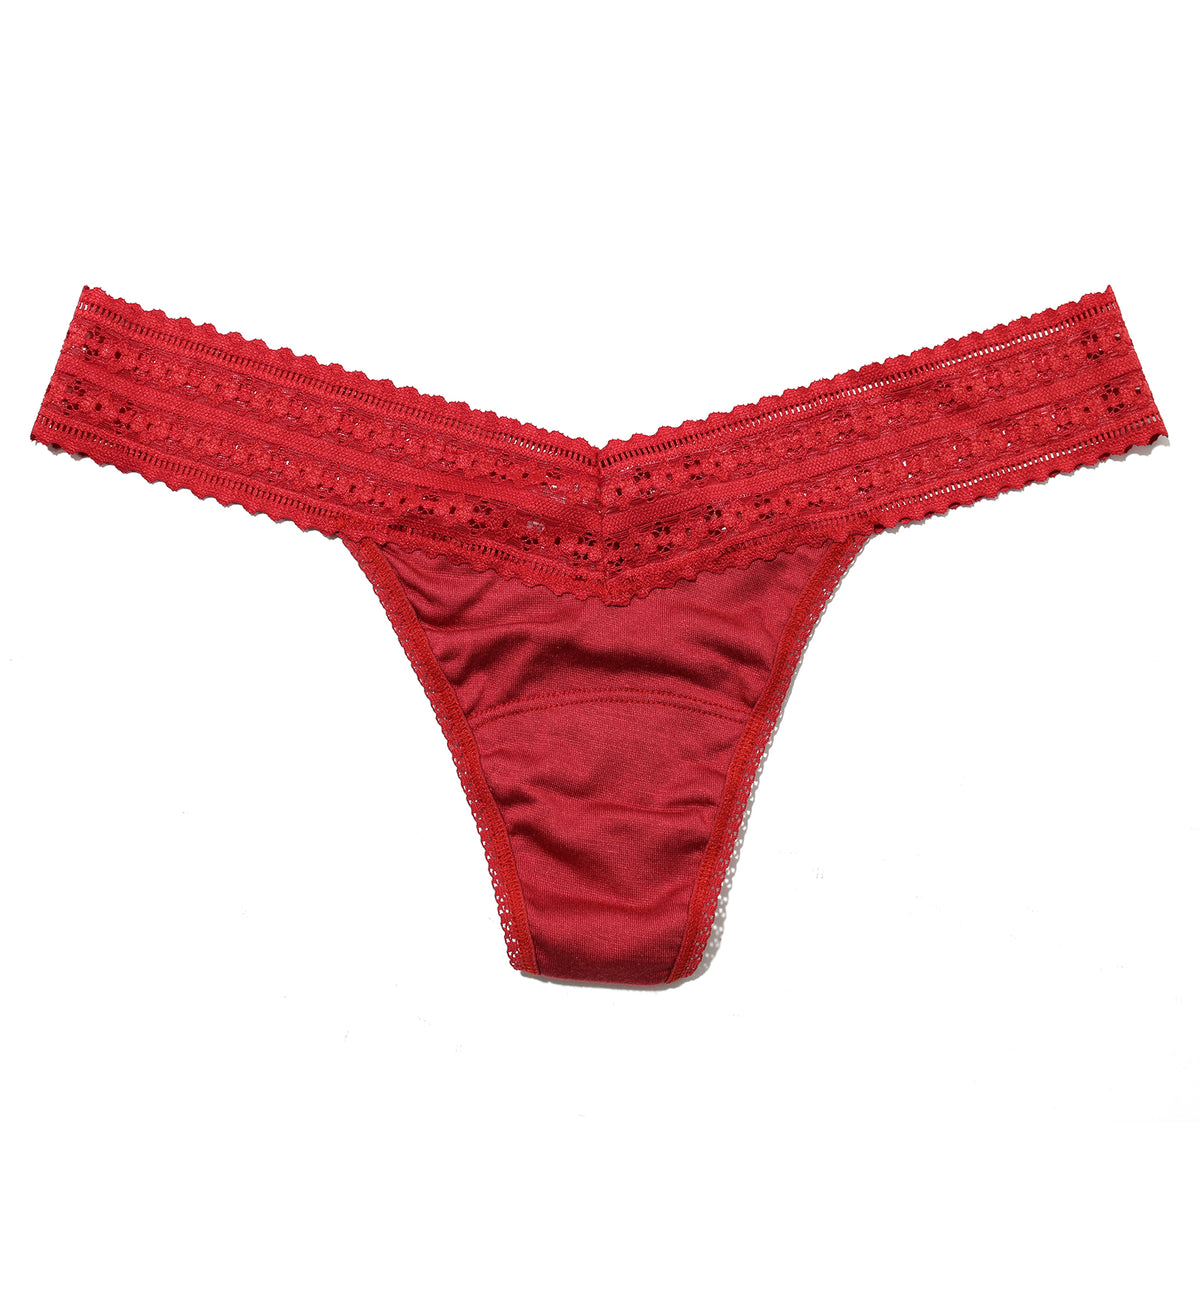 Hanky Panky DreamEase Low Rise Thong (631004),Burnt Sienna - Burnt Sienna,One Size